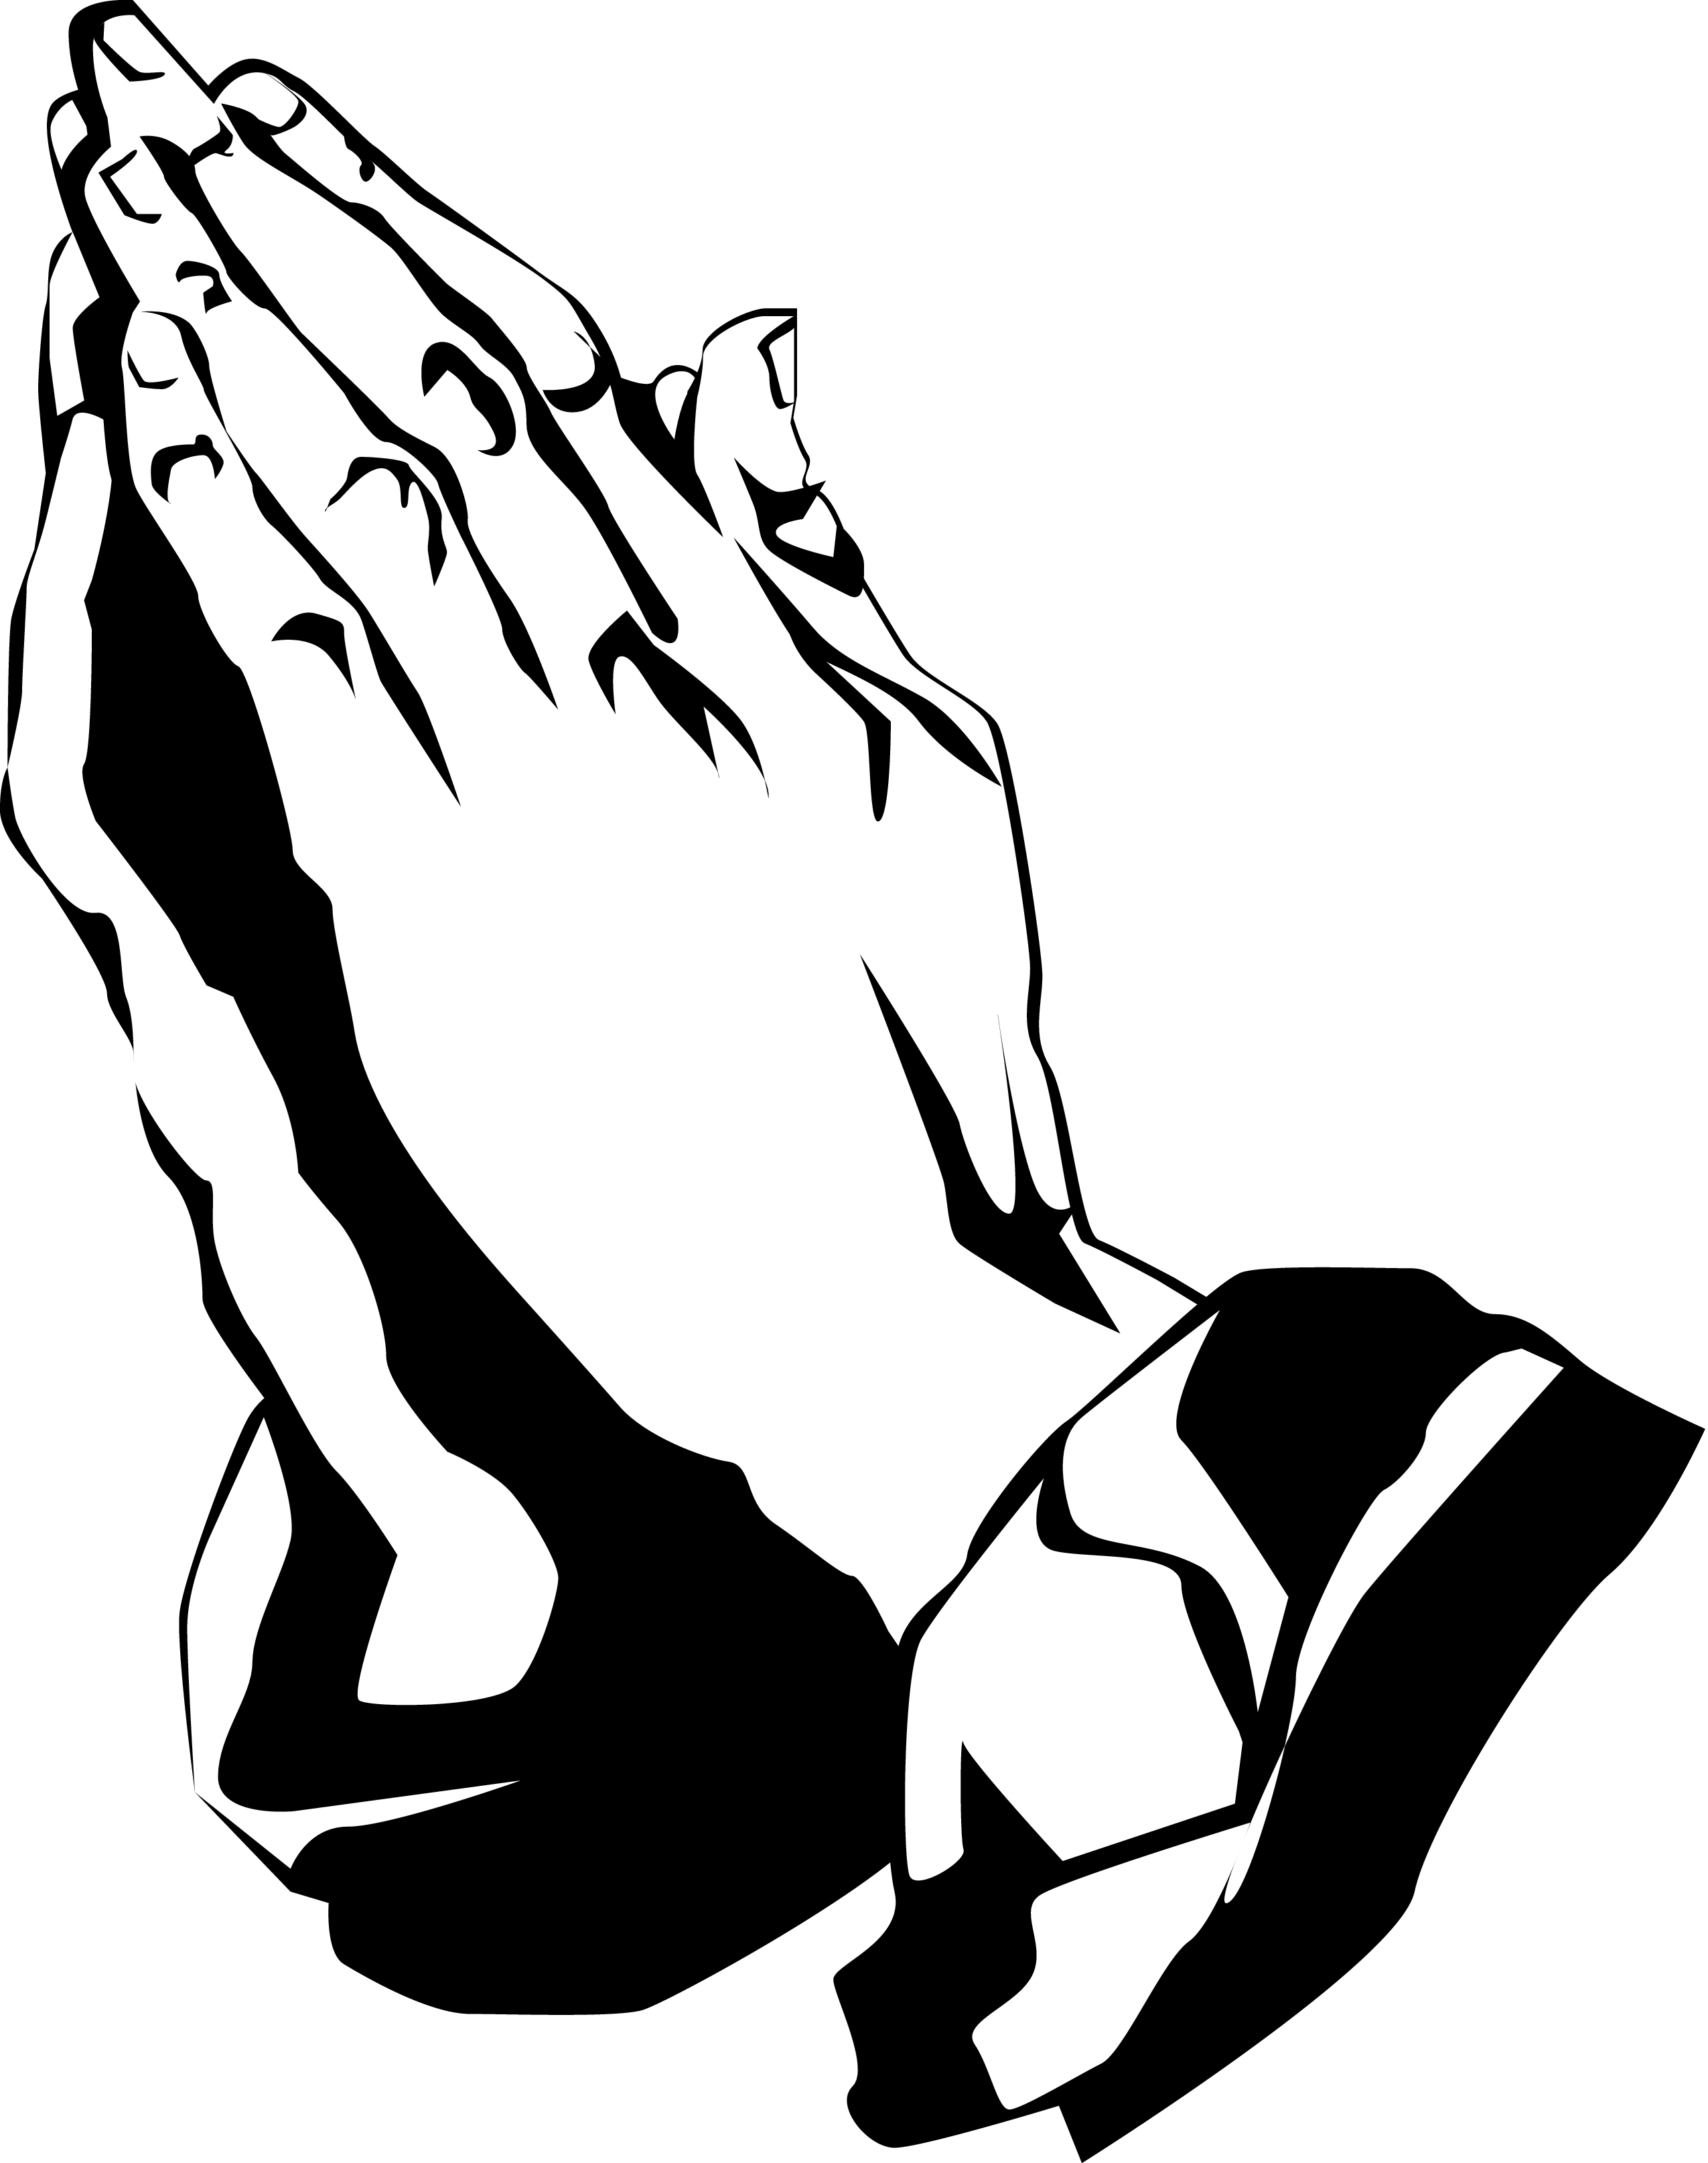 Prayer Hands Clipart | Clipart library - Free Clipart Images